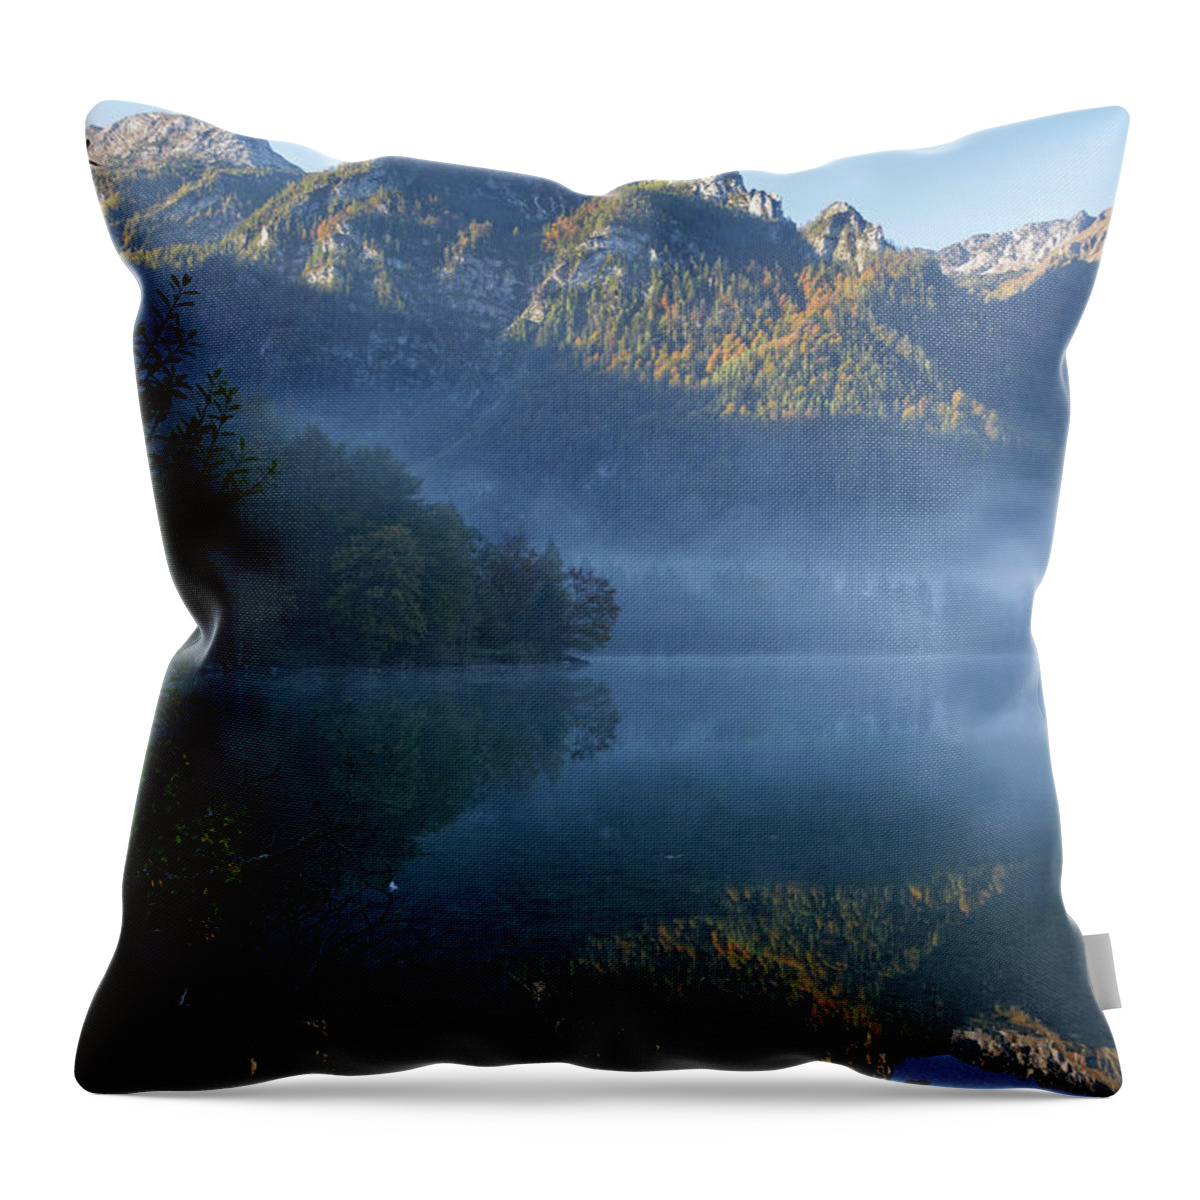 Tranquility Throw Pillow featuring the photograph Austria, Upper Austria, View Of #2 by Westend61